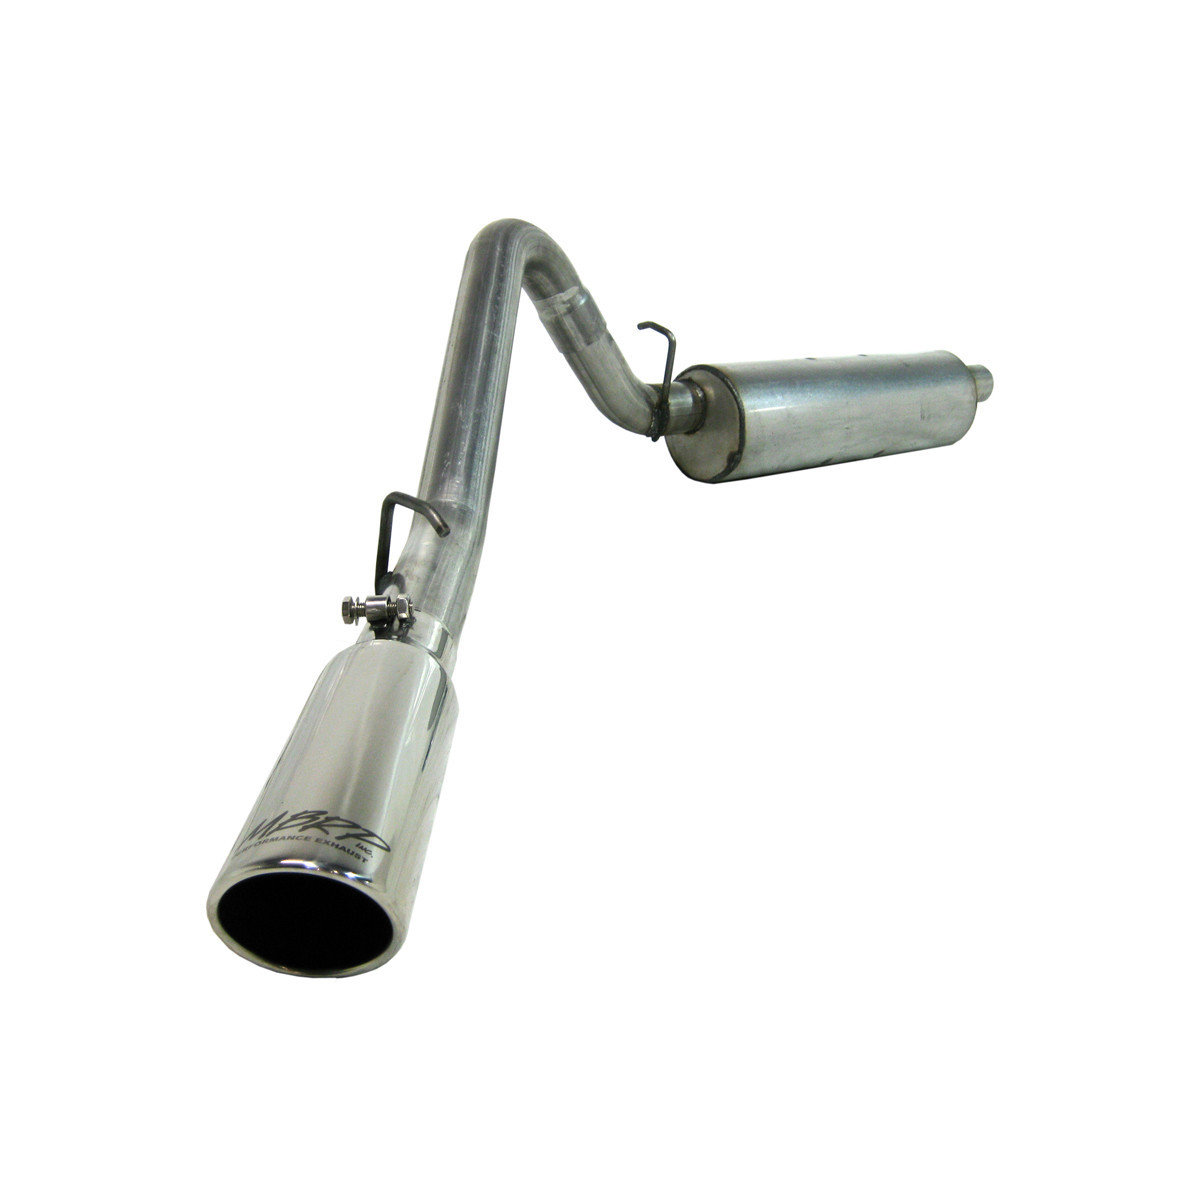 MBRP S5512AL Installer Series Cat Back Exhaust System in Aluminized Steel  for 97-99 Jeep Wrangler TJ with  I-4 &  I-6 Engines | Quadratec